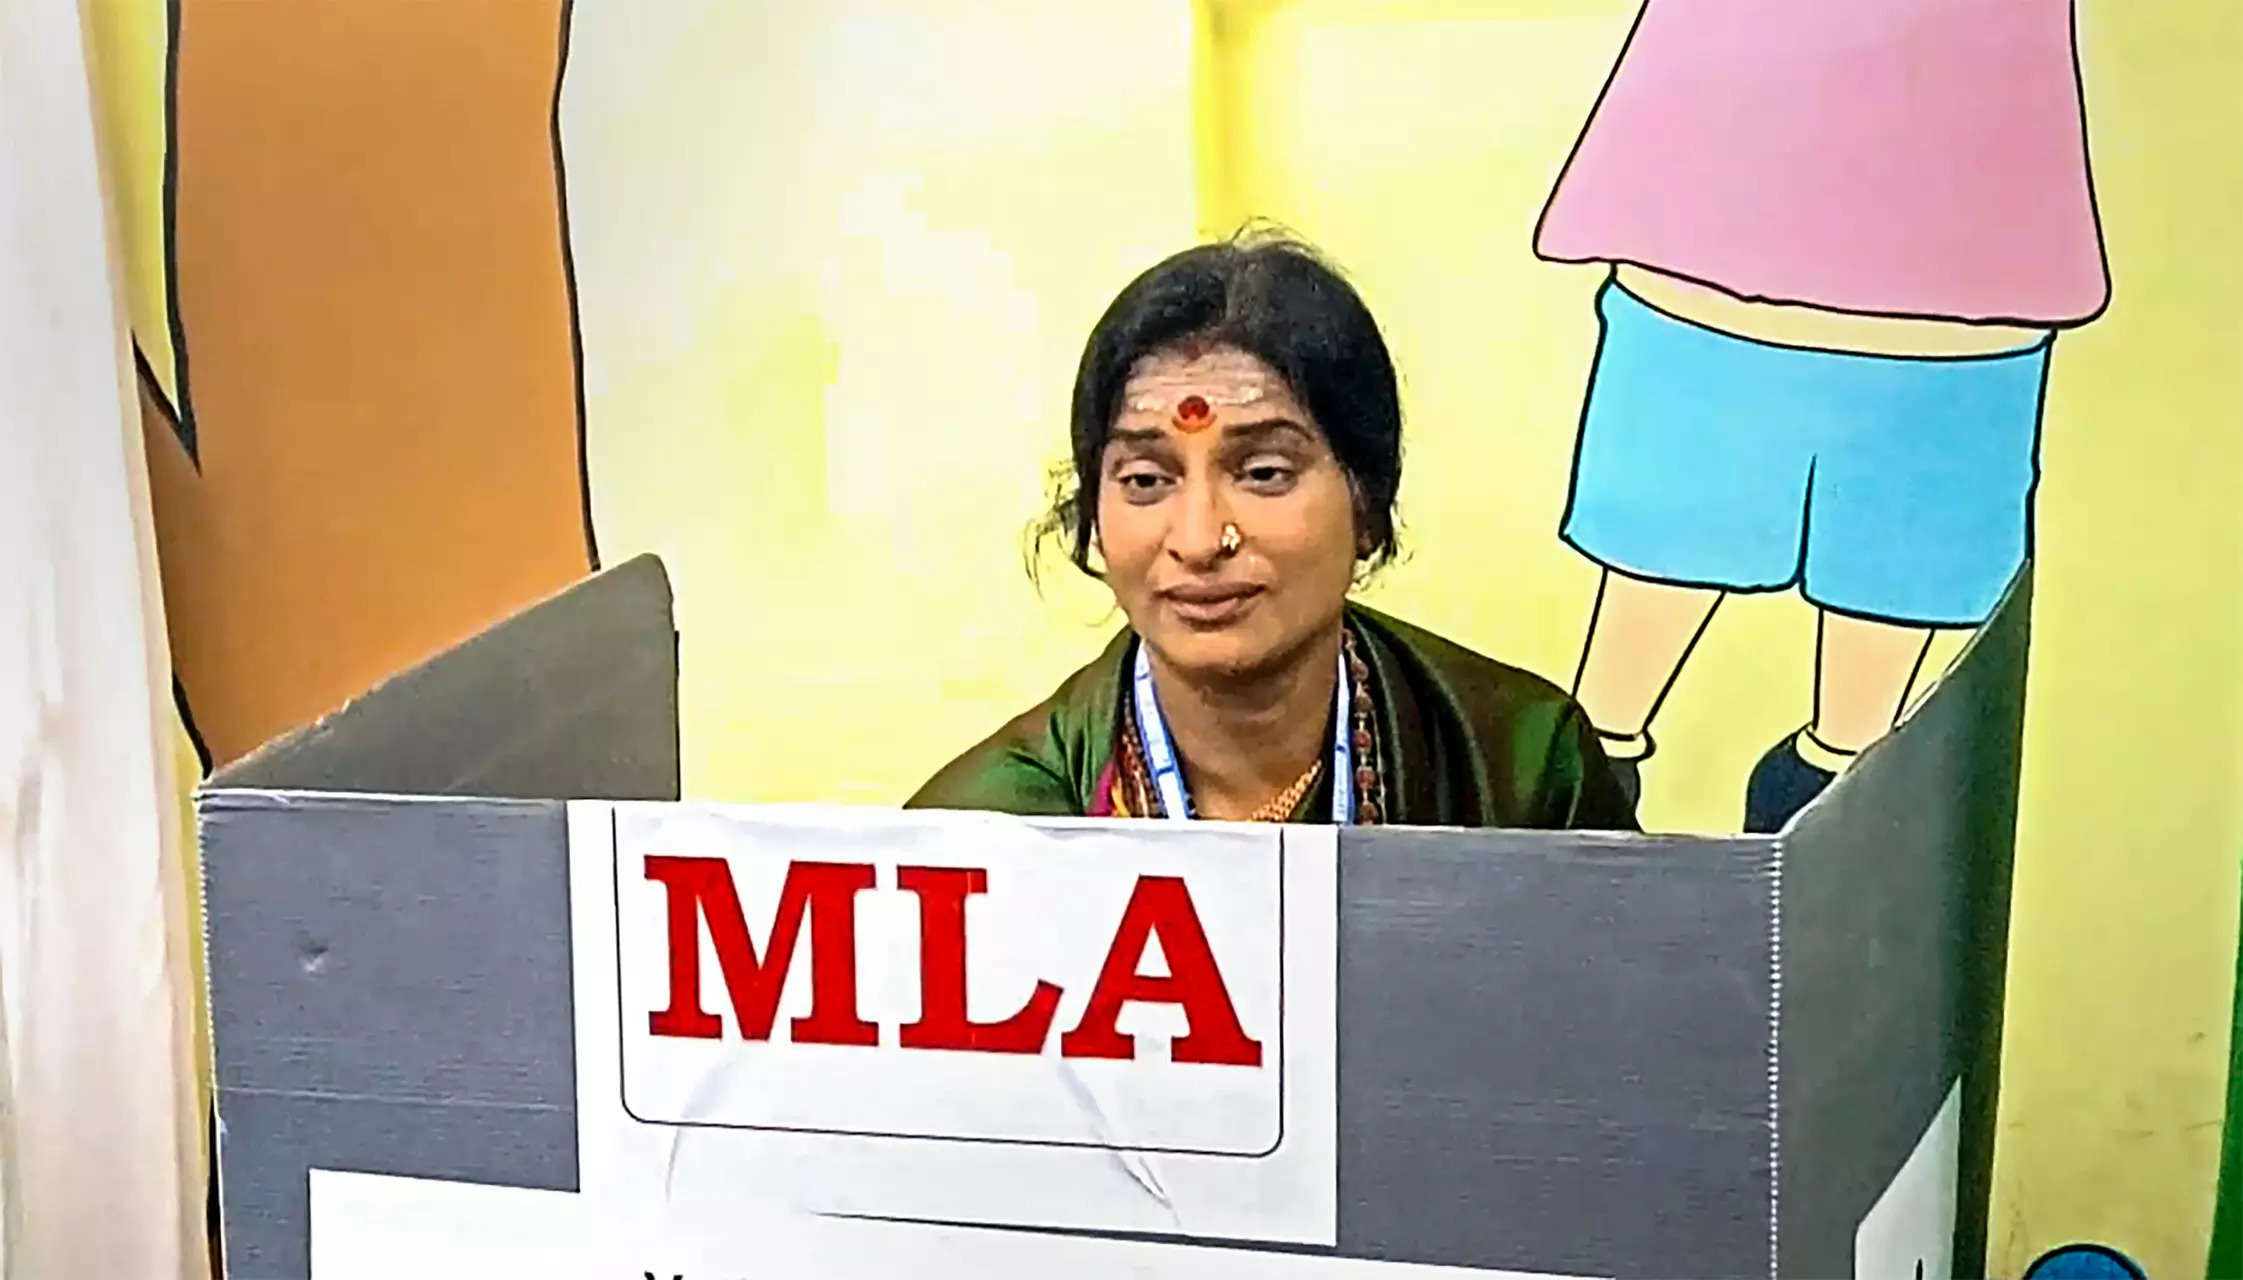 BJP's Madhavi Latha faces legal trouble over voter ID checks, after Muslim women asked to prove their identity inside voting booth 